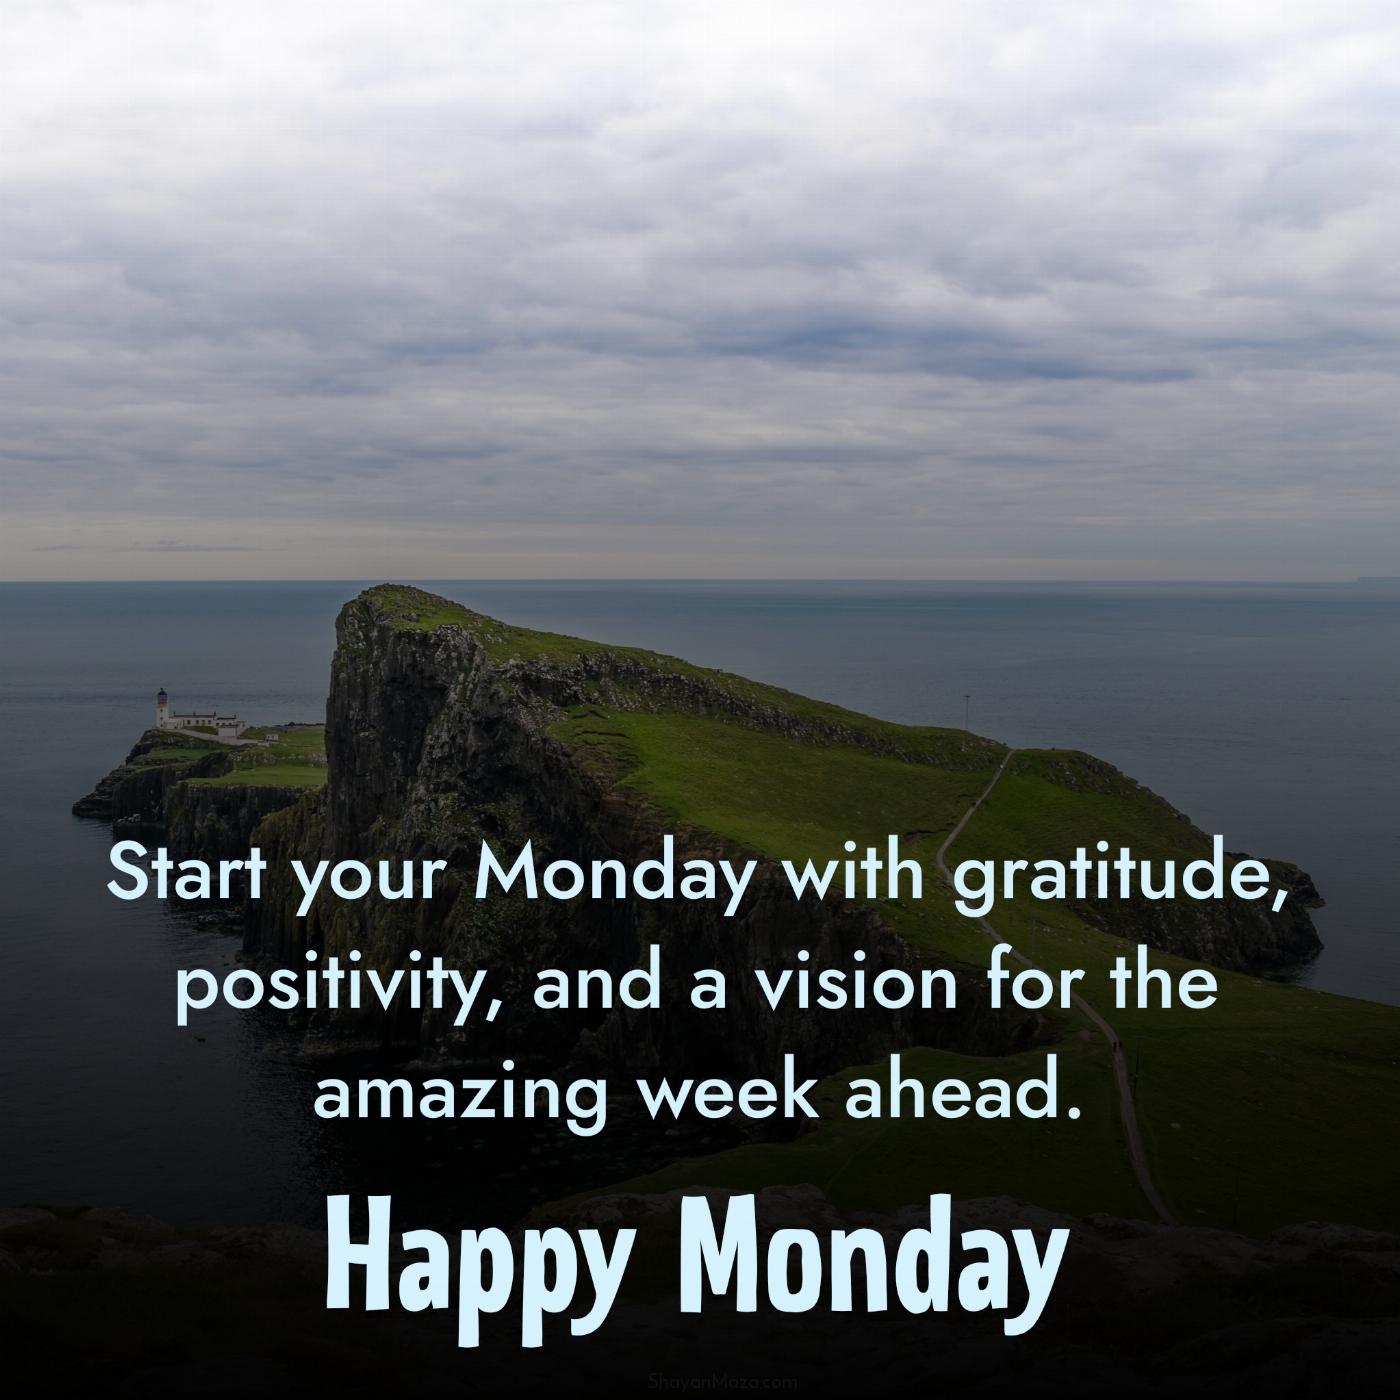 Start your Monday with gratitude positivity and a vision